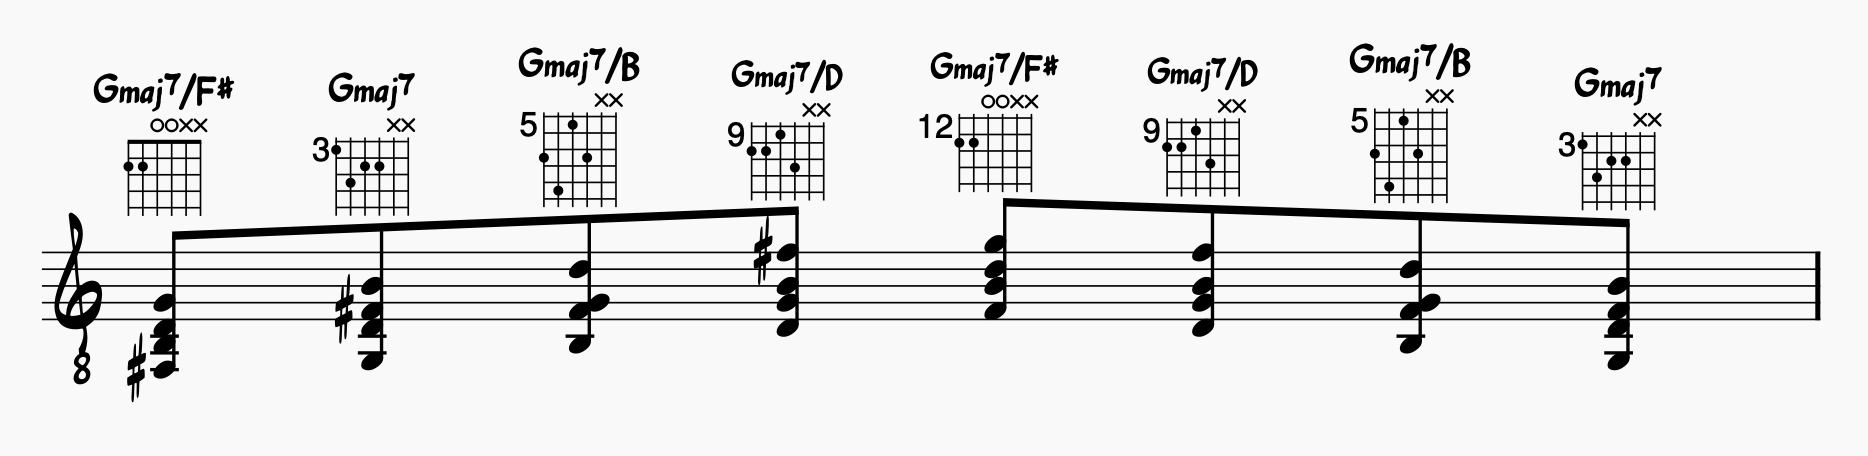 Major chord switching exercises using 8th notes; 7th chords and inversions